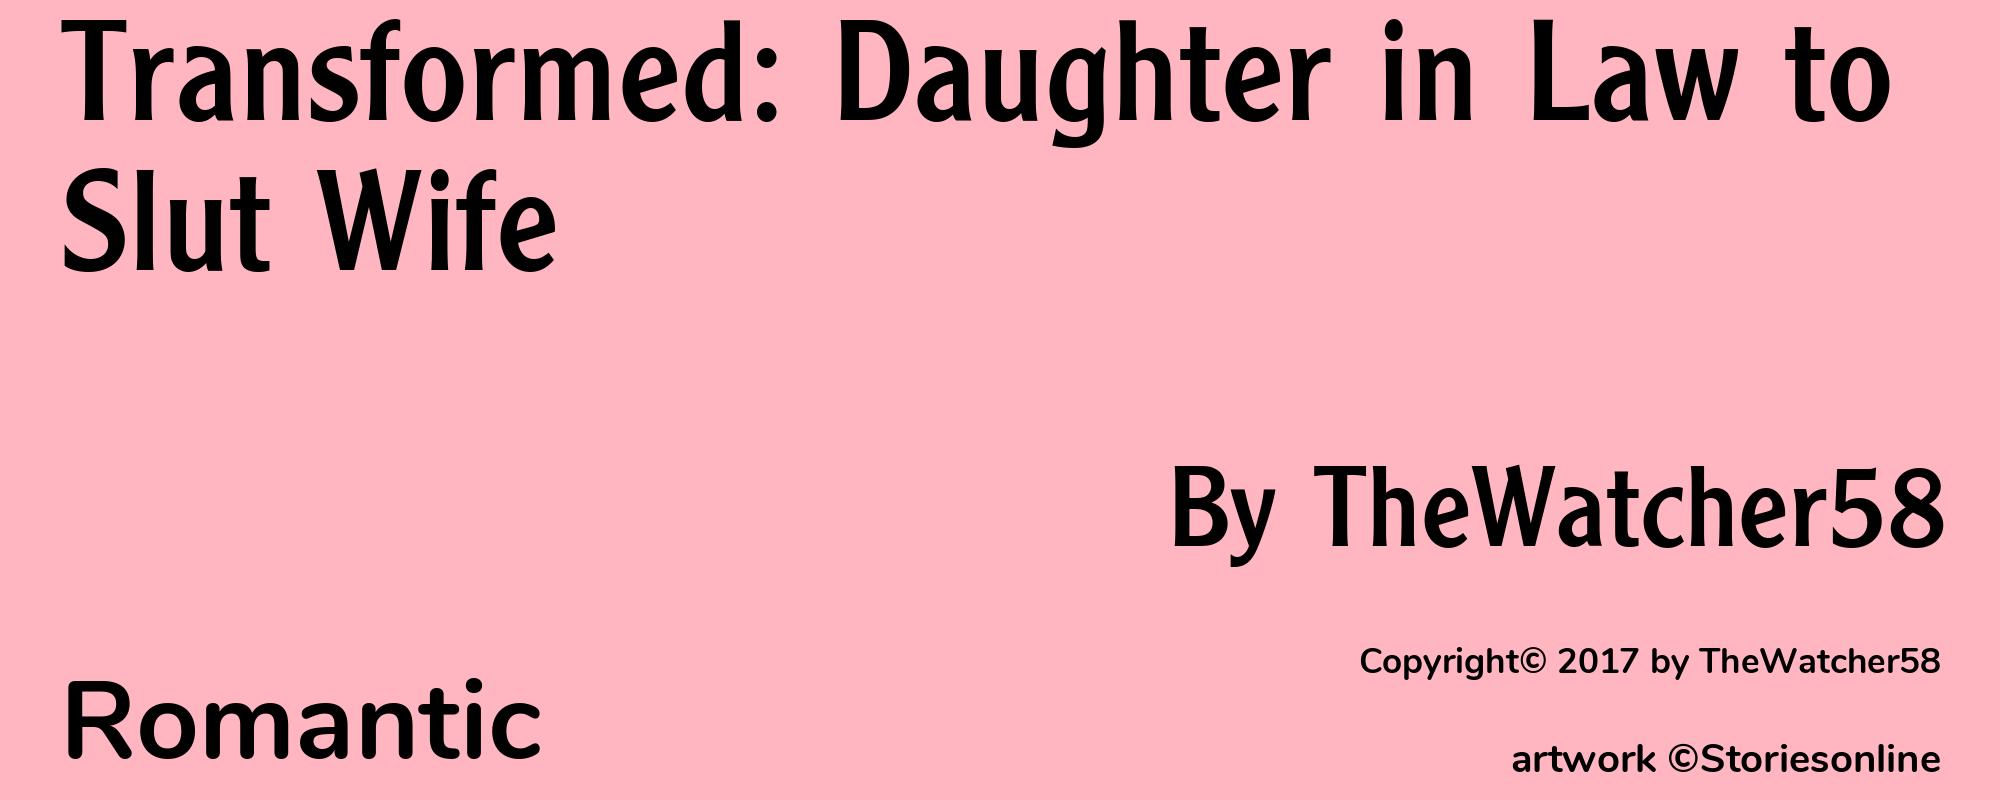 Transformed: Daughter in Law to Slut Wife - Cover